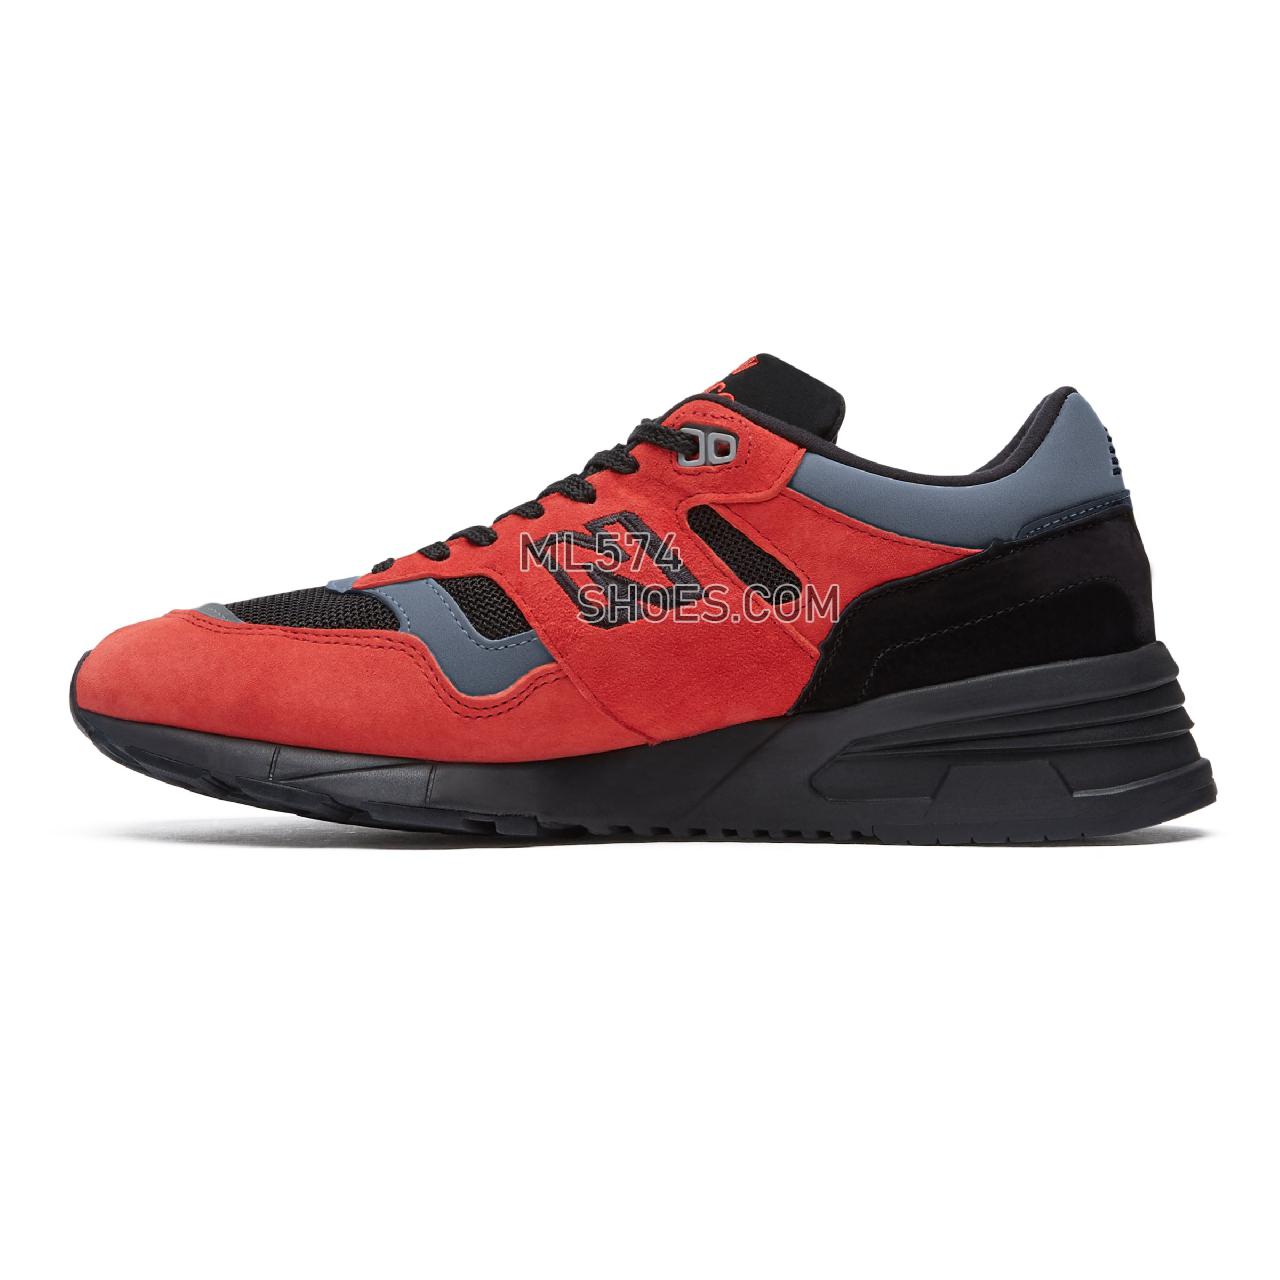 New Balance Made in UK 1530 - Men's Made in USA And UK Sneakers - Red with Black and Grey - M1530LA